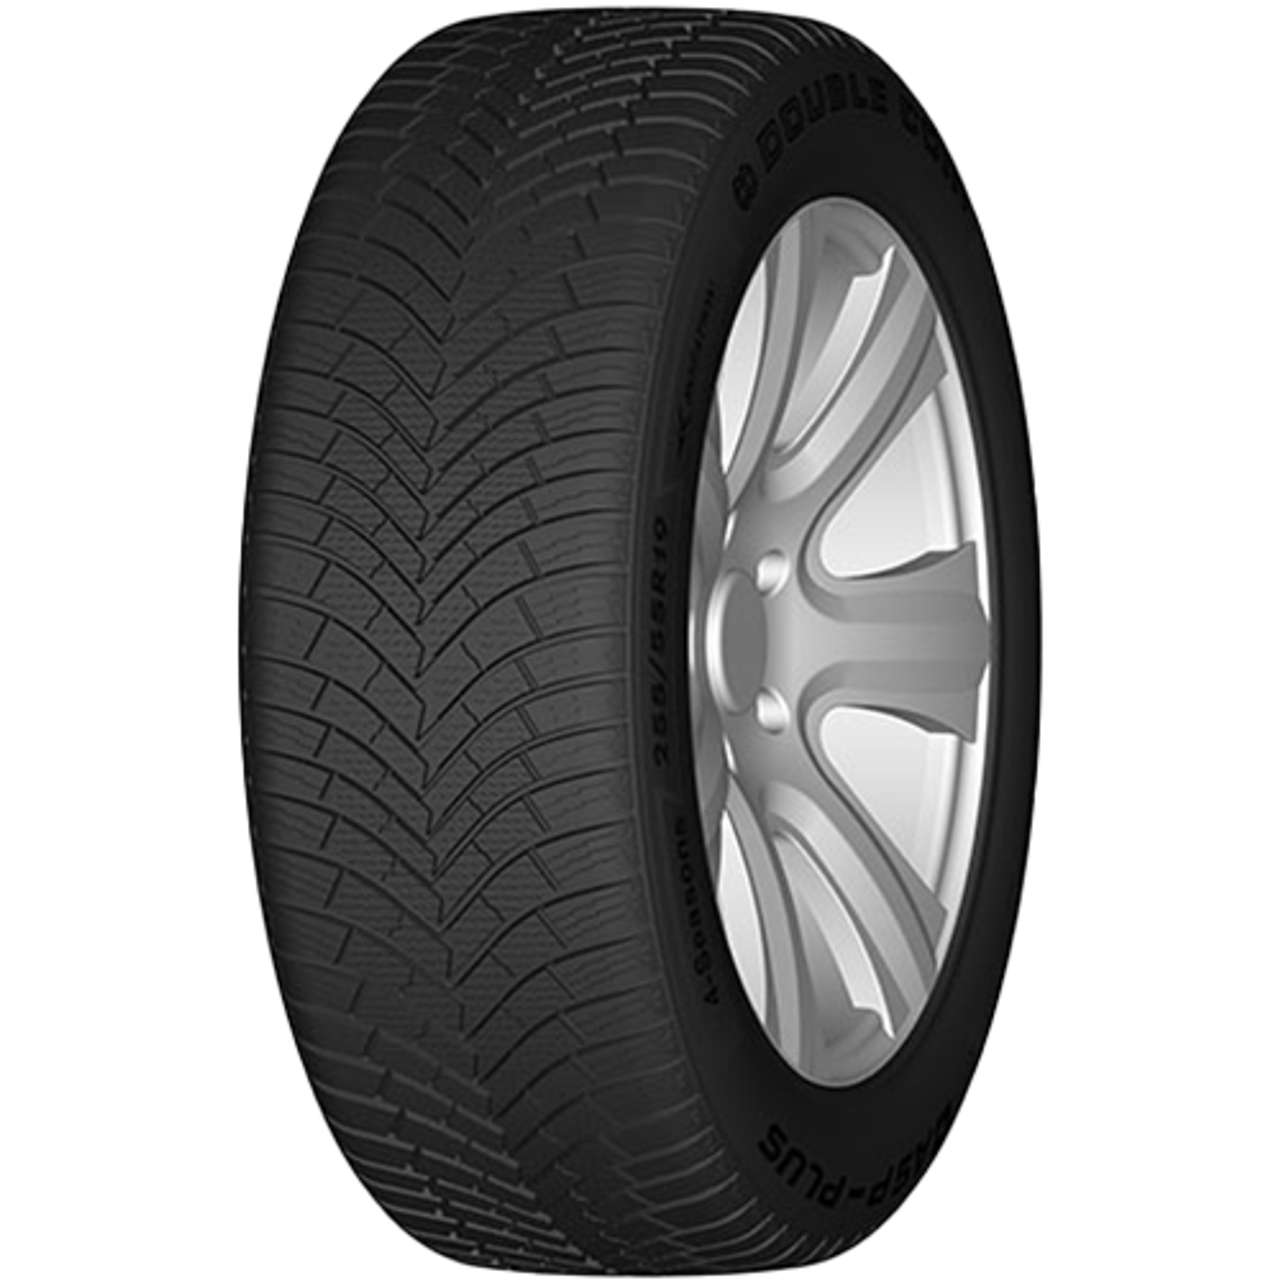 DOUBLE COIN DASP+ 195/55R16 91H BSW XL